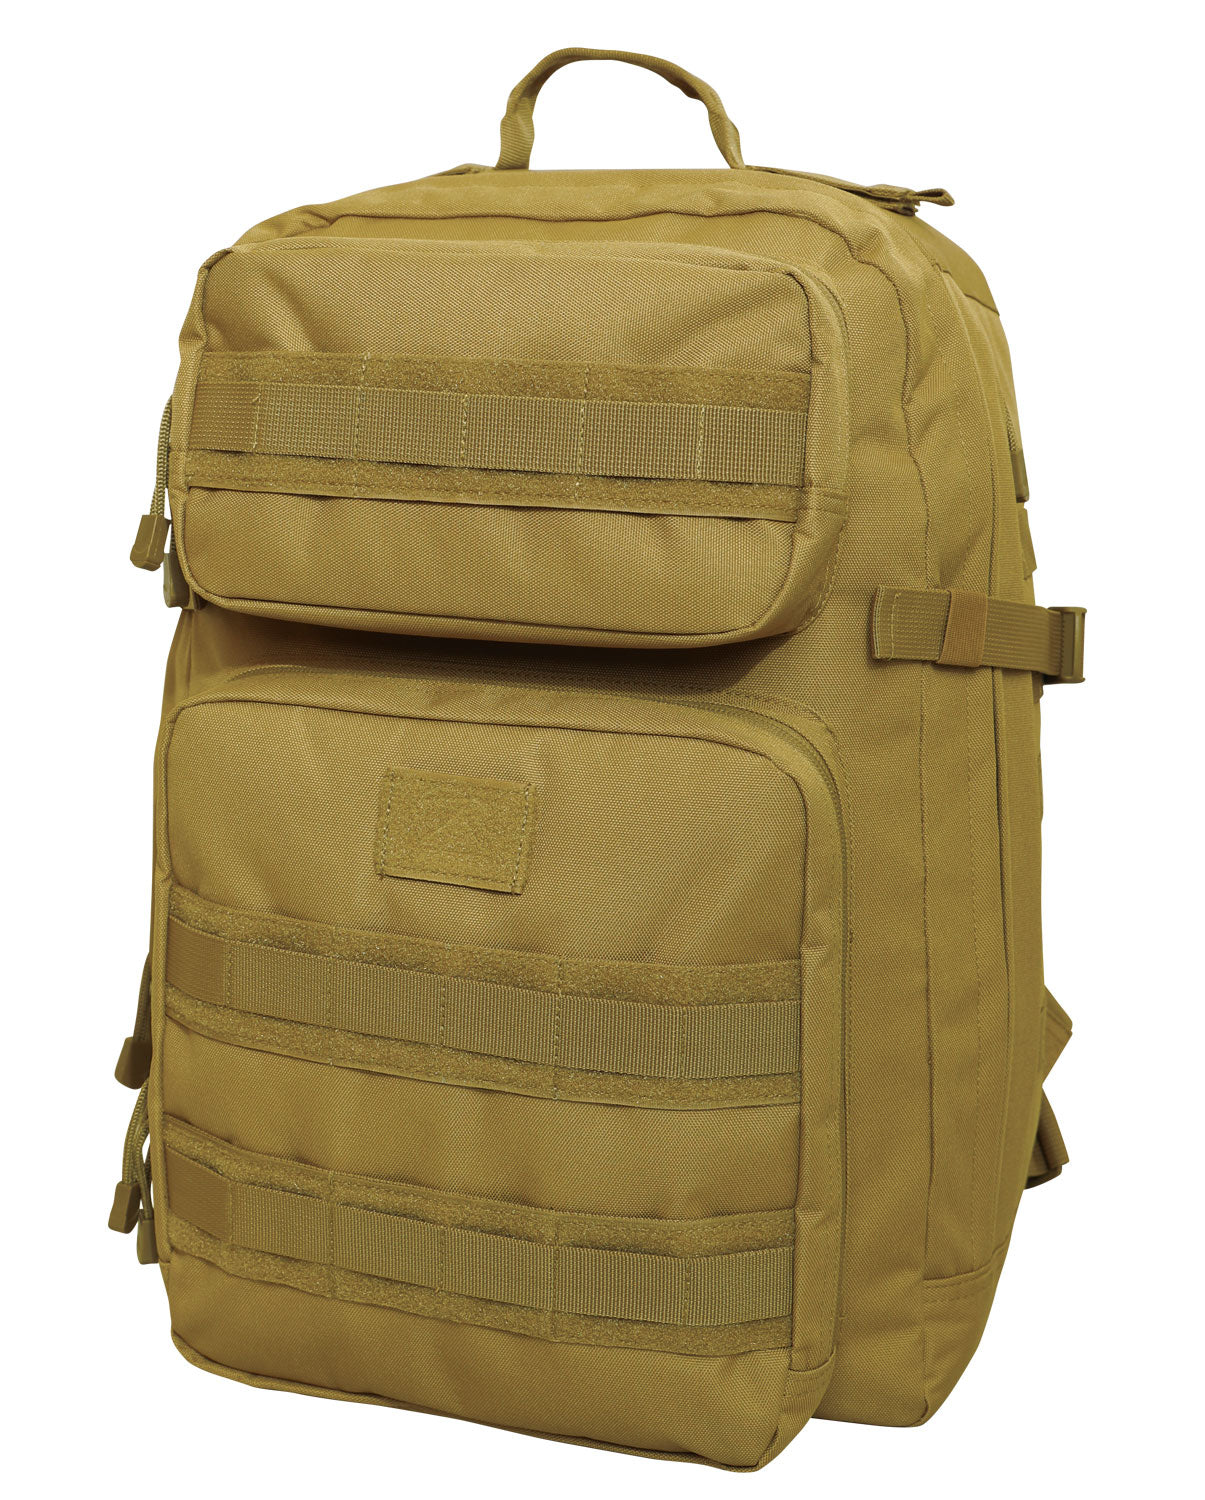 Milspec Fast Mover Tactical Backpack Backpacks & Packs MilTac Tactical Military Outdoor Gear Australia